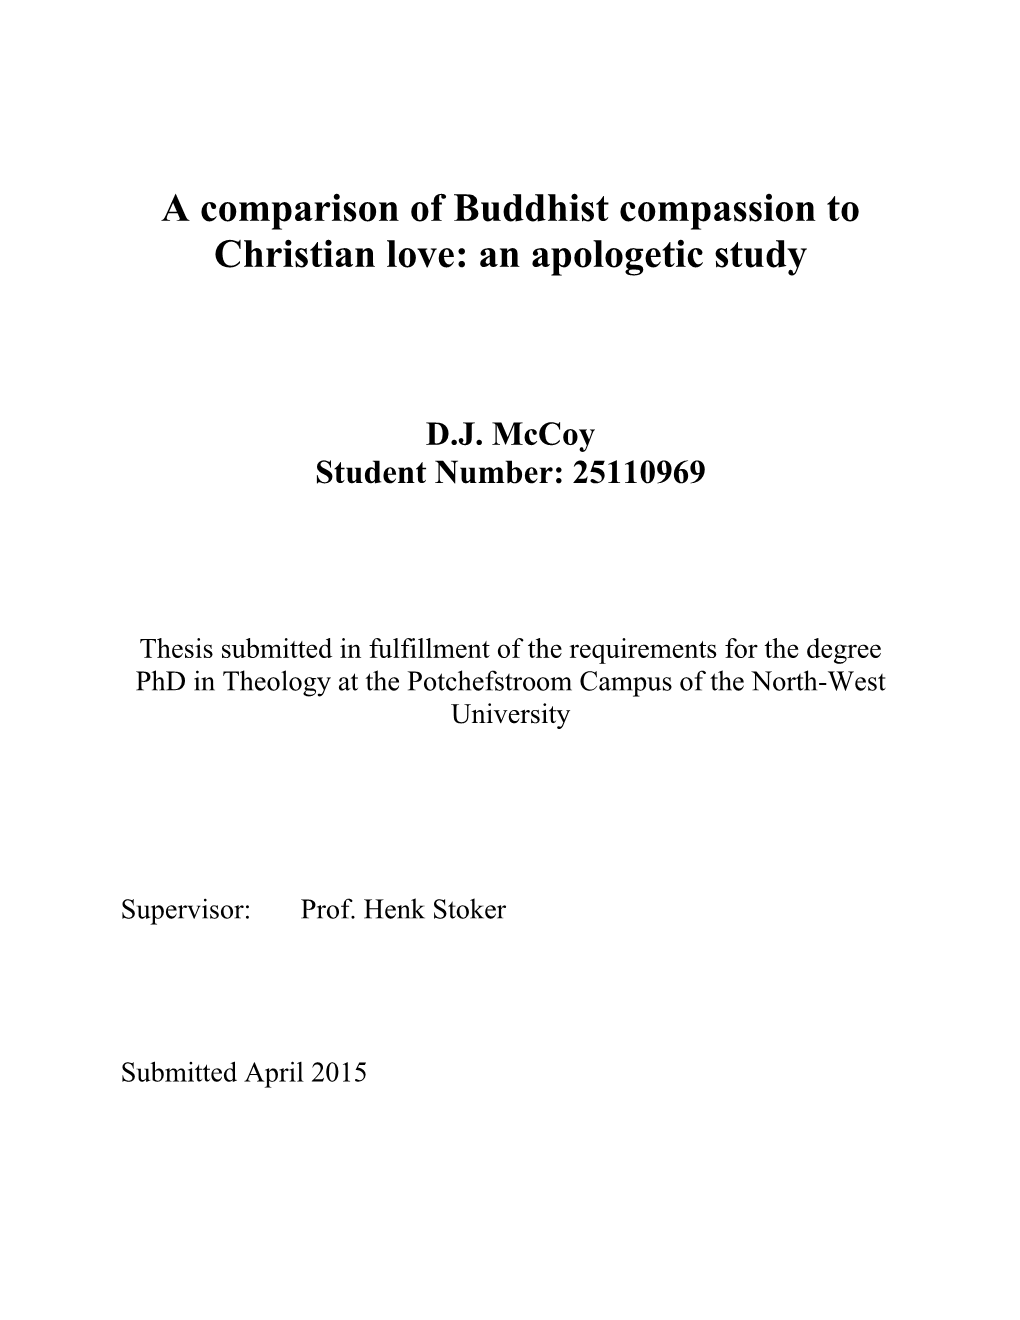 A Comparison of Buddhist Compassion to Christian Love: an Apologetic Study